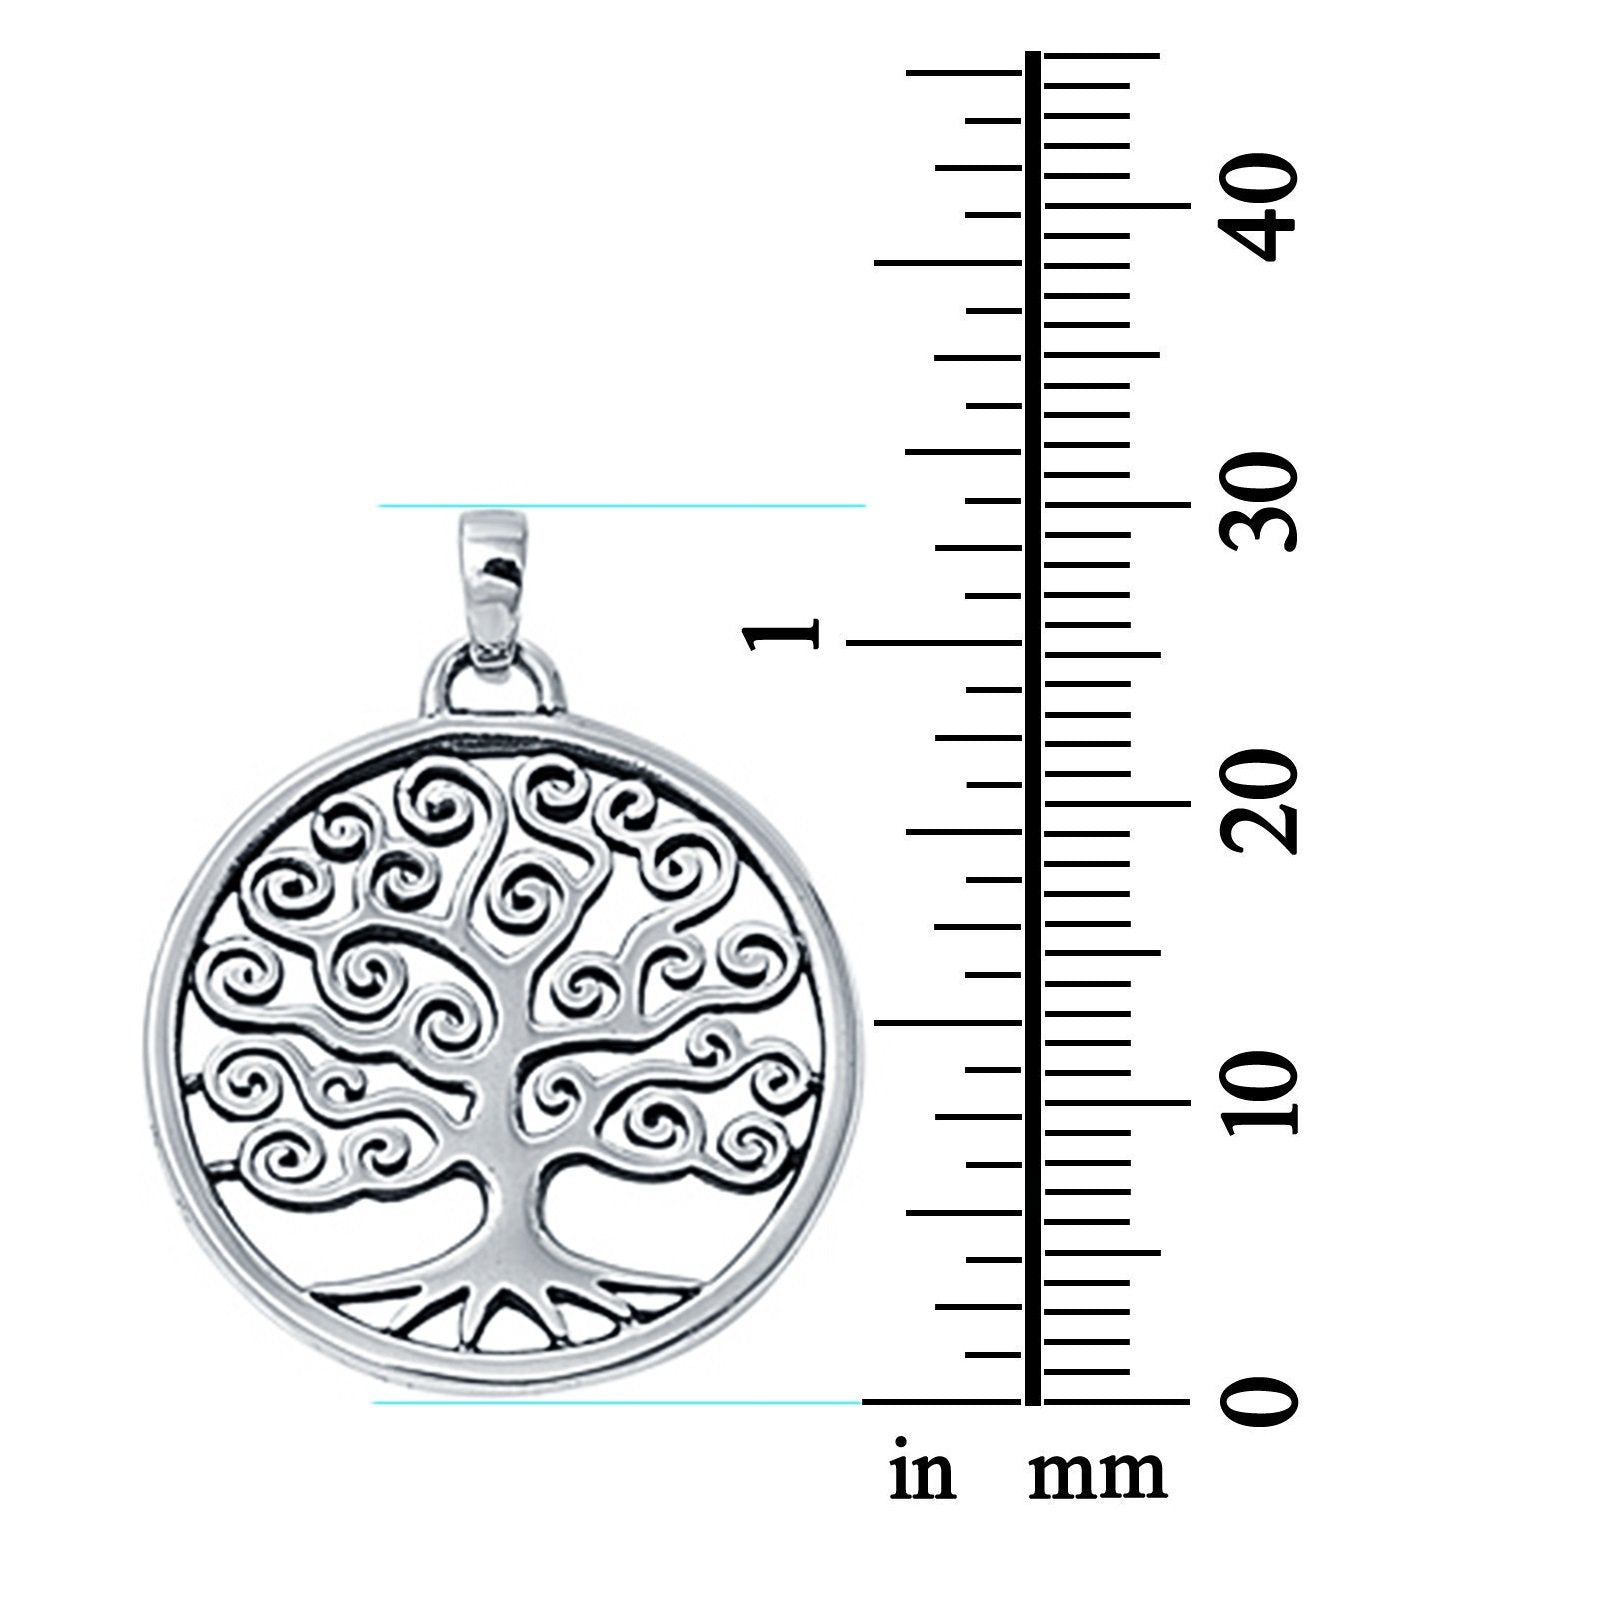 Tree of Life Pendant Charm Round 925 Sterling Silver